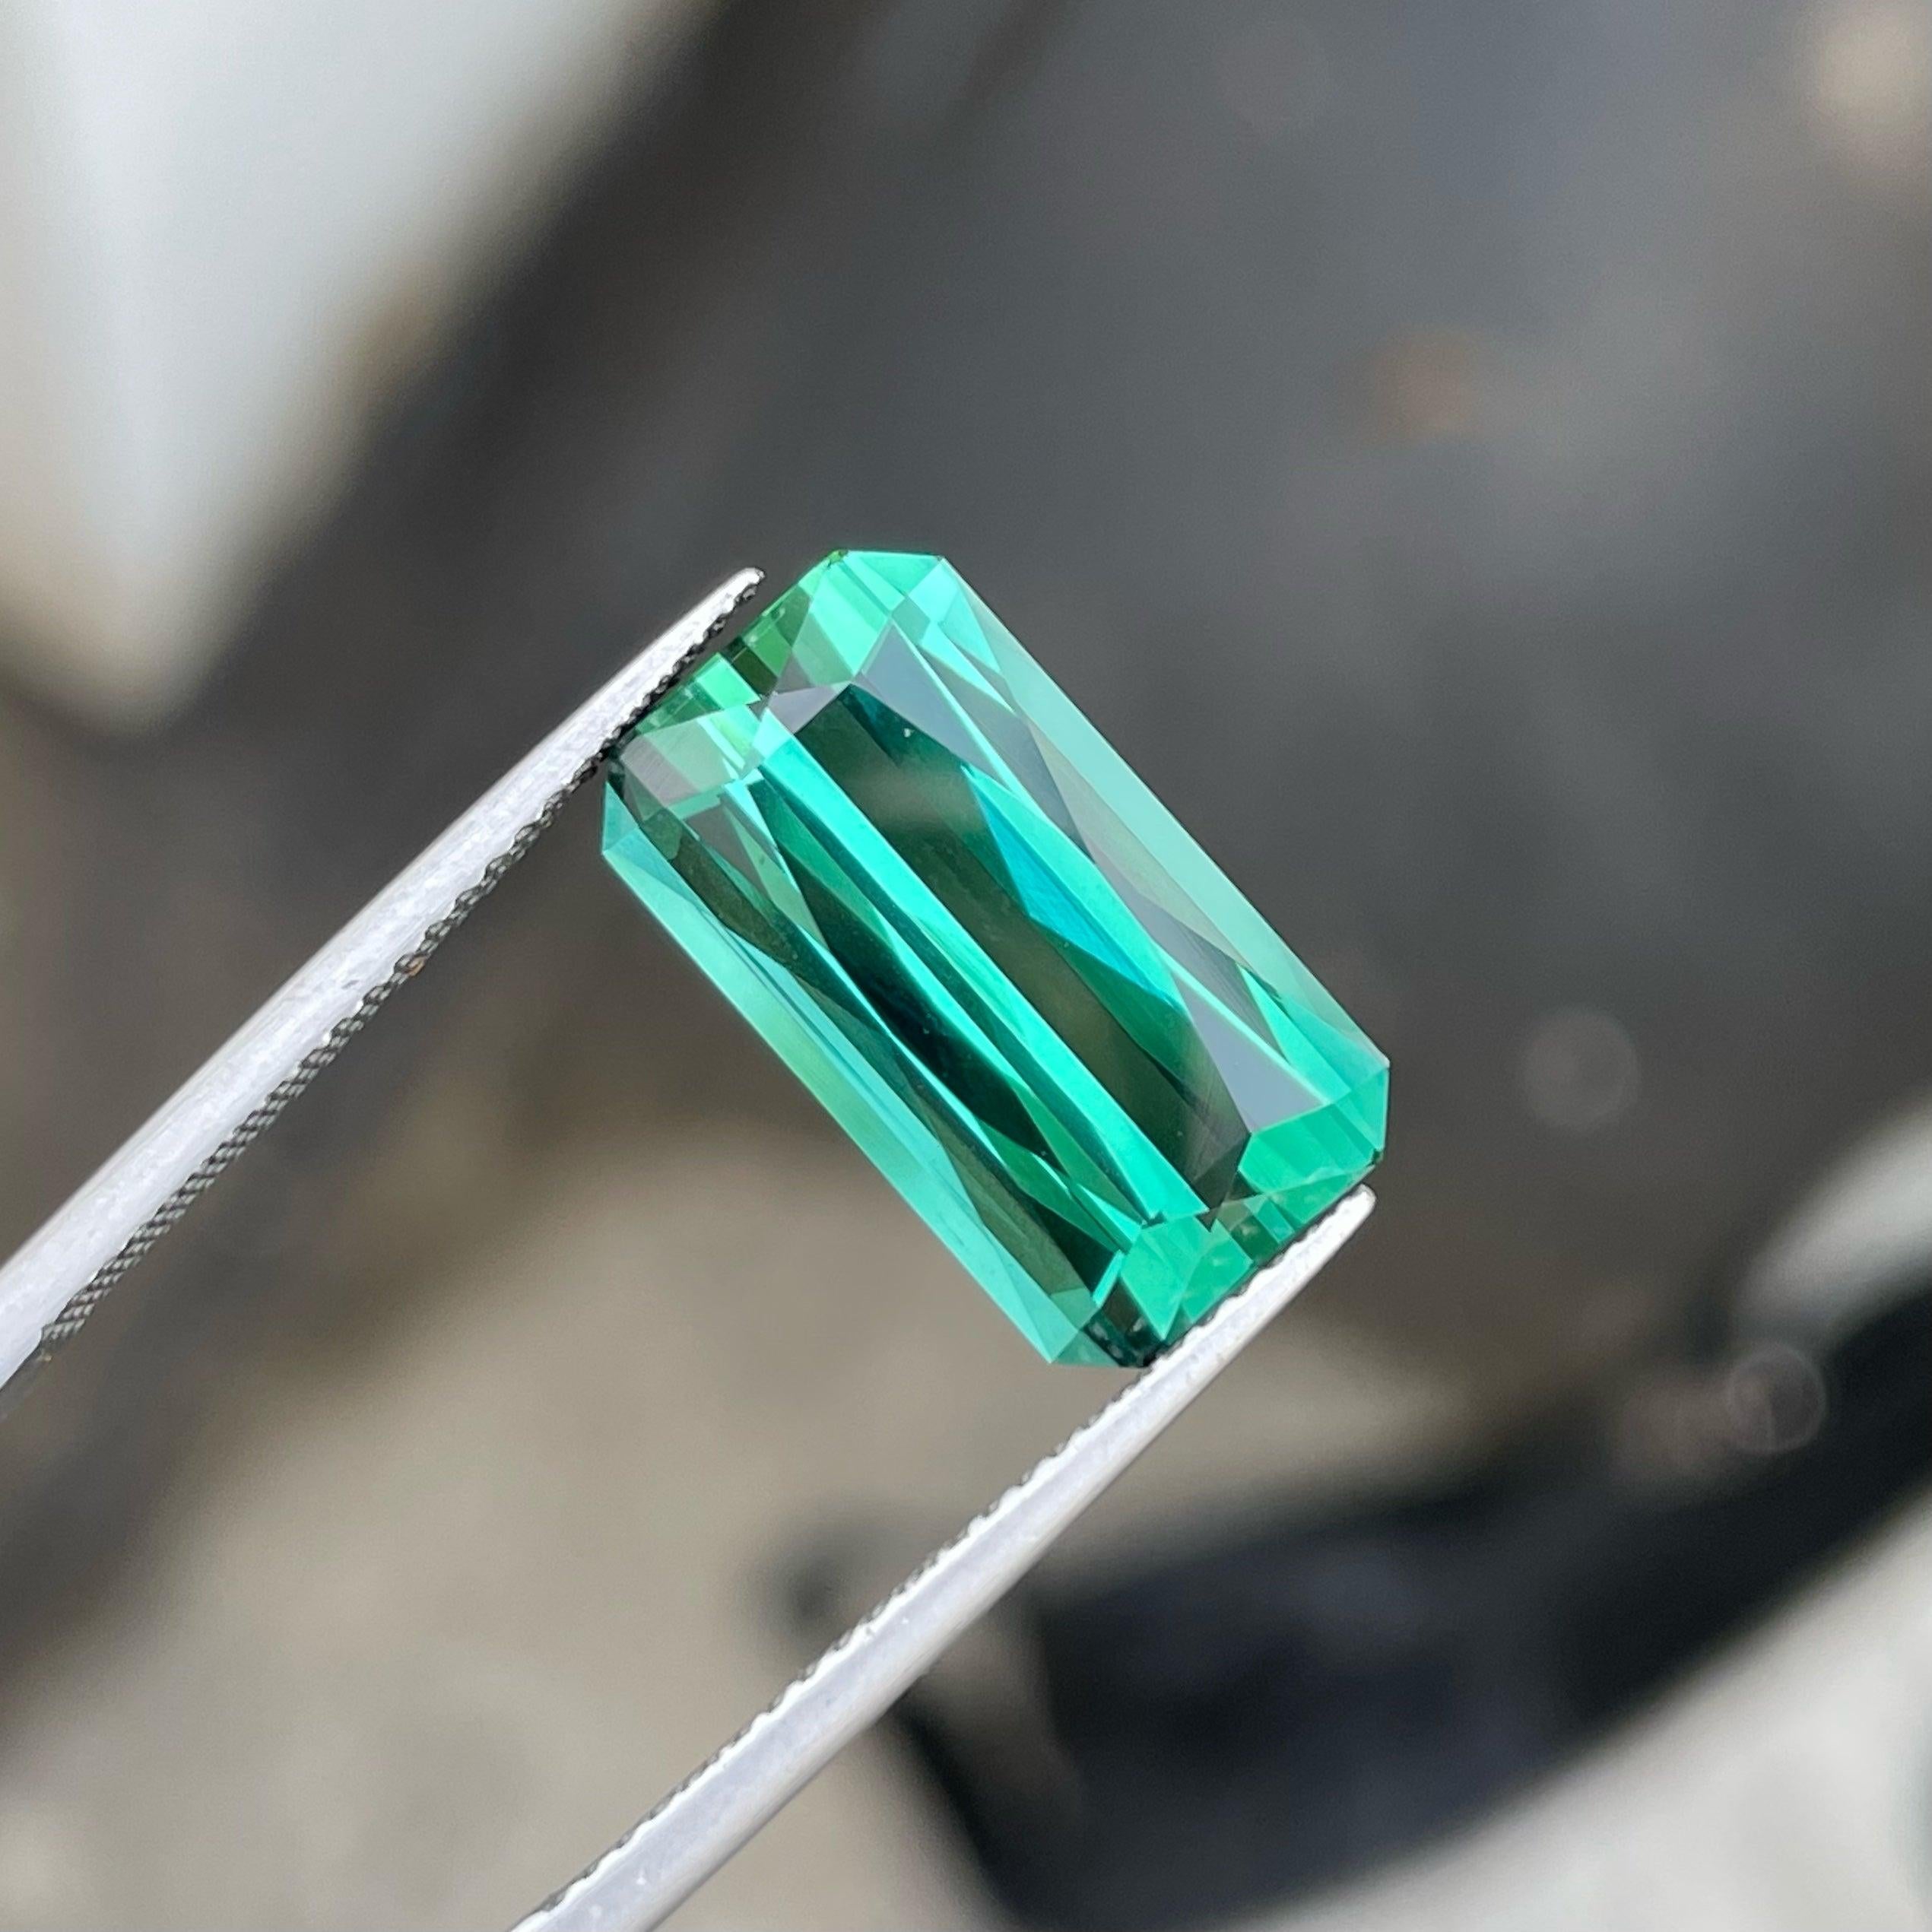 Fantastic Natural Greenish Blue Tourmaline Stone, available for sale at wholesale price natural high quality 8.15 Carats Octagon Shape From Afghanistan.

Product Information:
GEMSTONE TYPE:	Fantastic Natural Greenish Blue Tourmaline